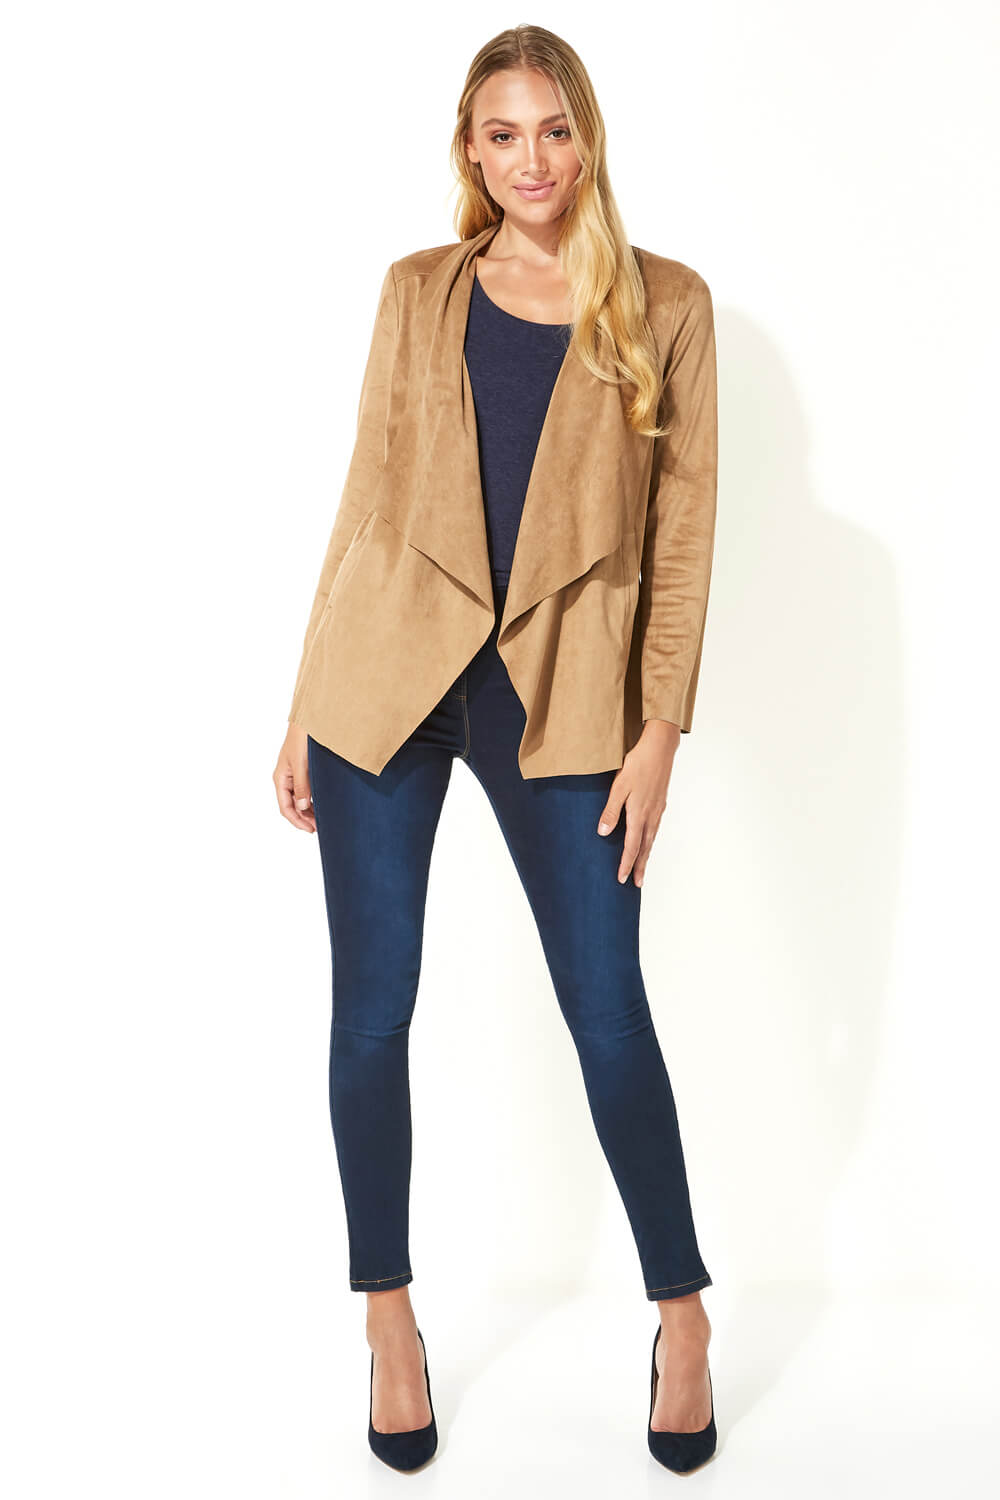 Camel  Faux Suede Waterfall Front Jacket, Image 2 of 5